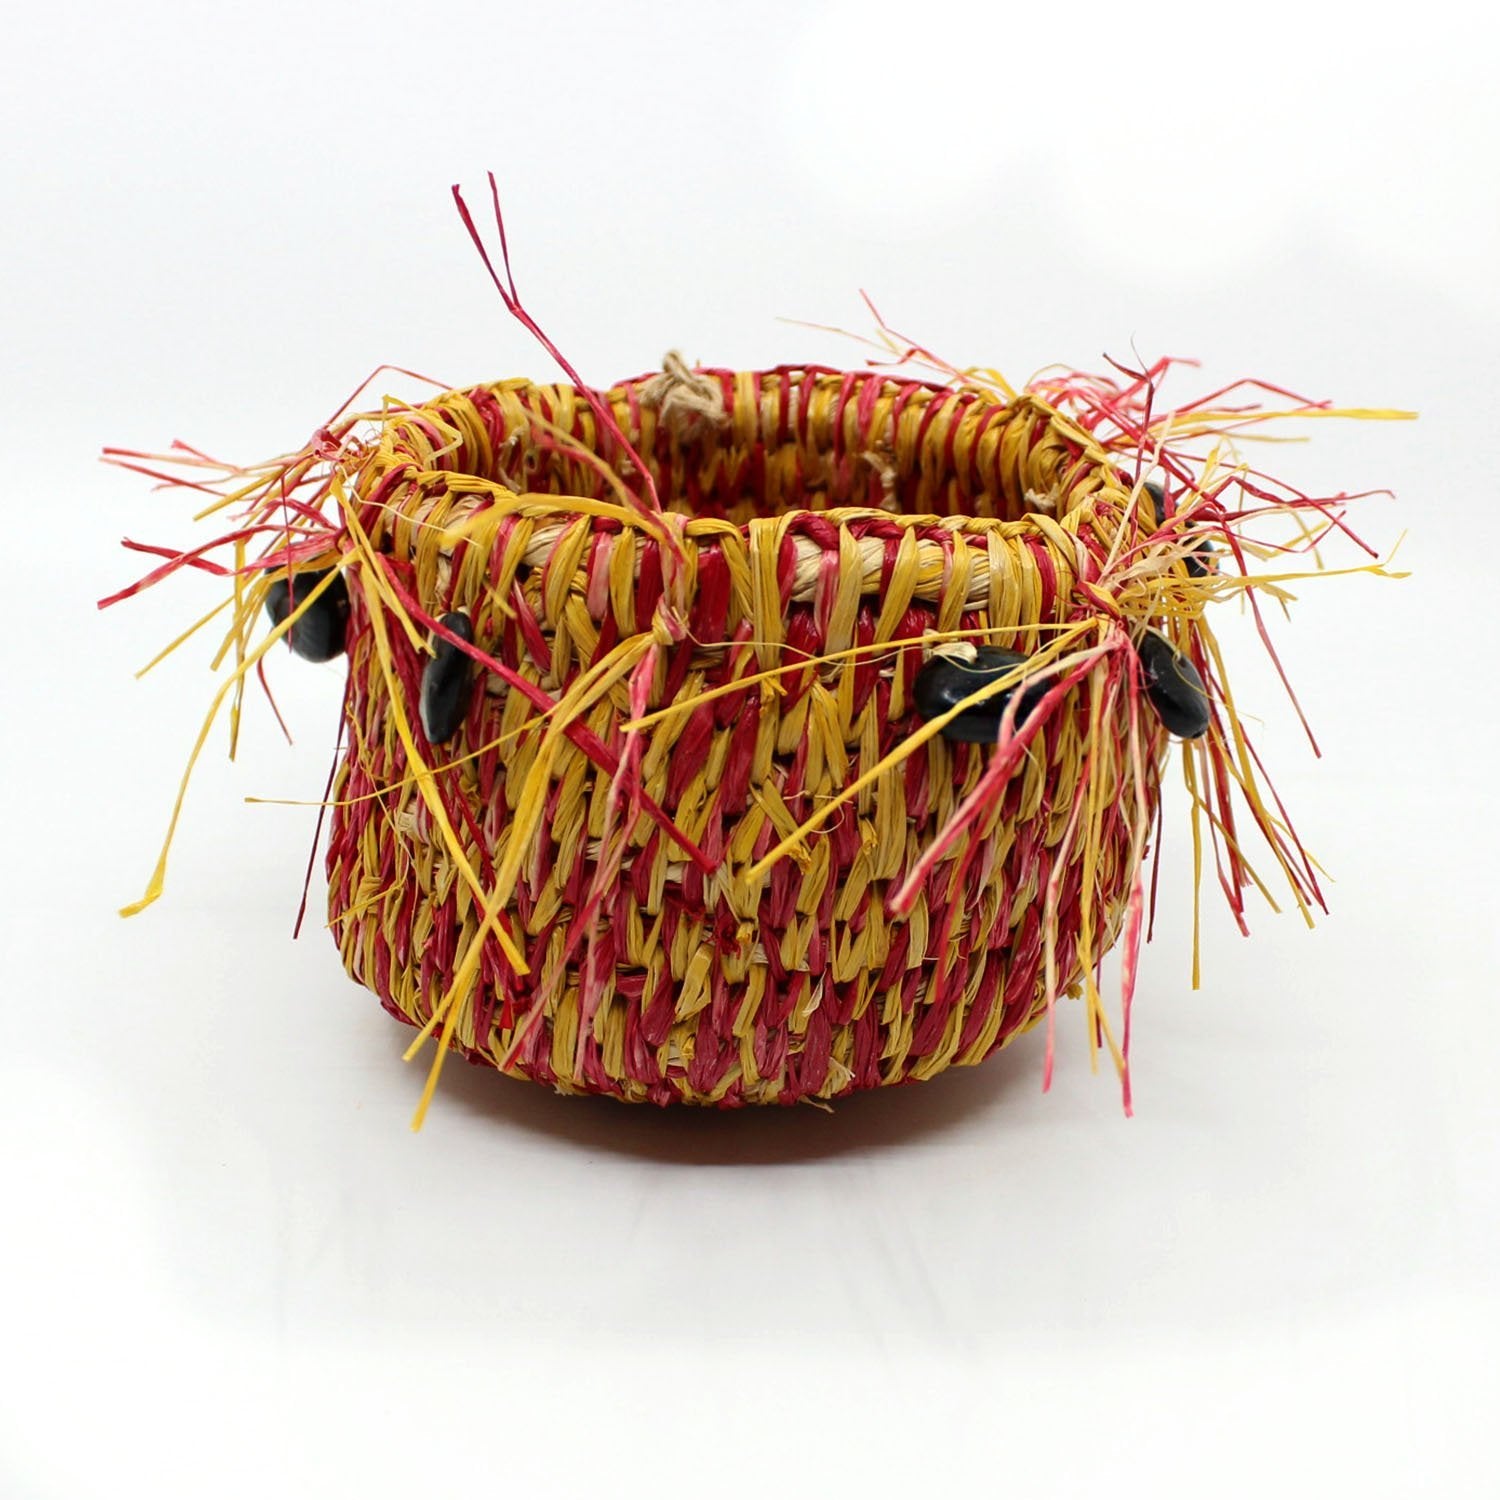 Basket in Reds and Yellows